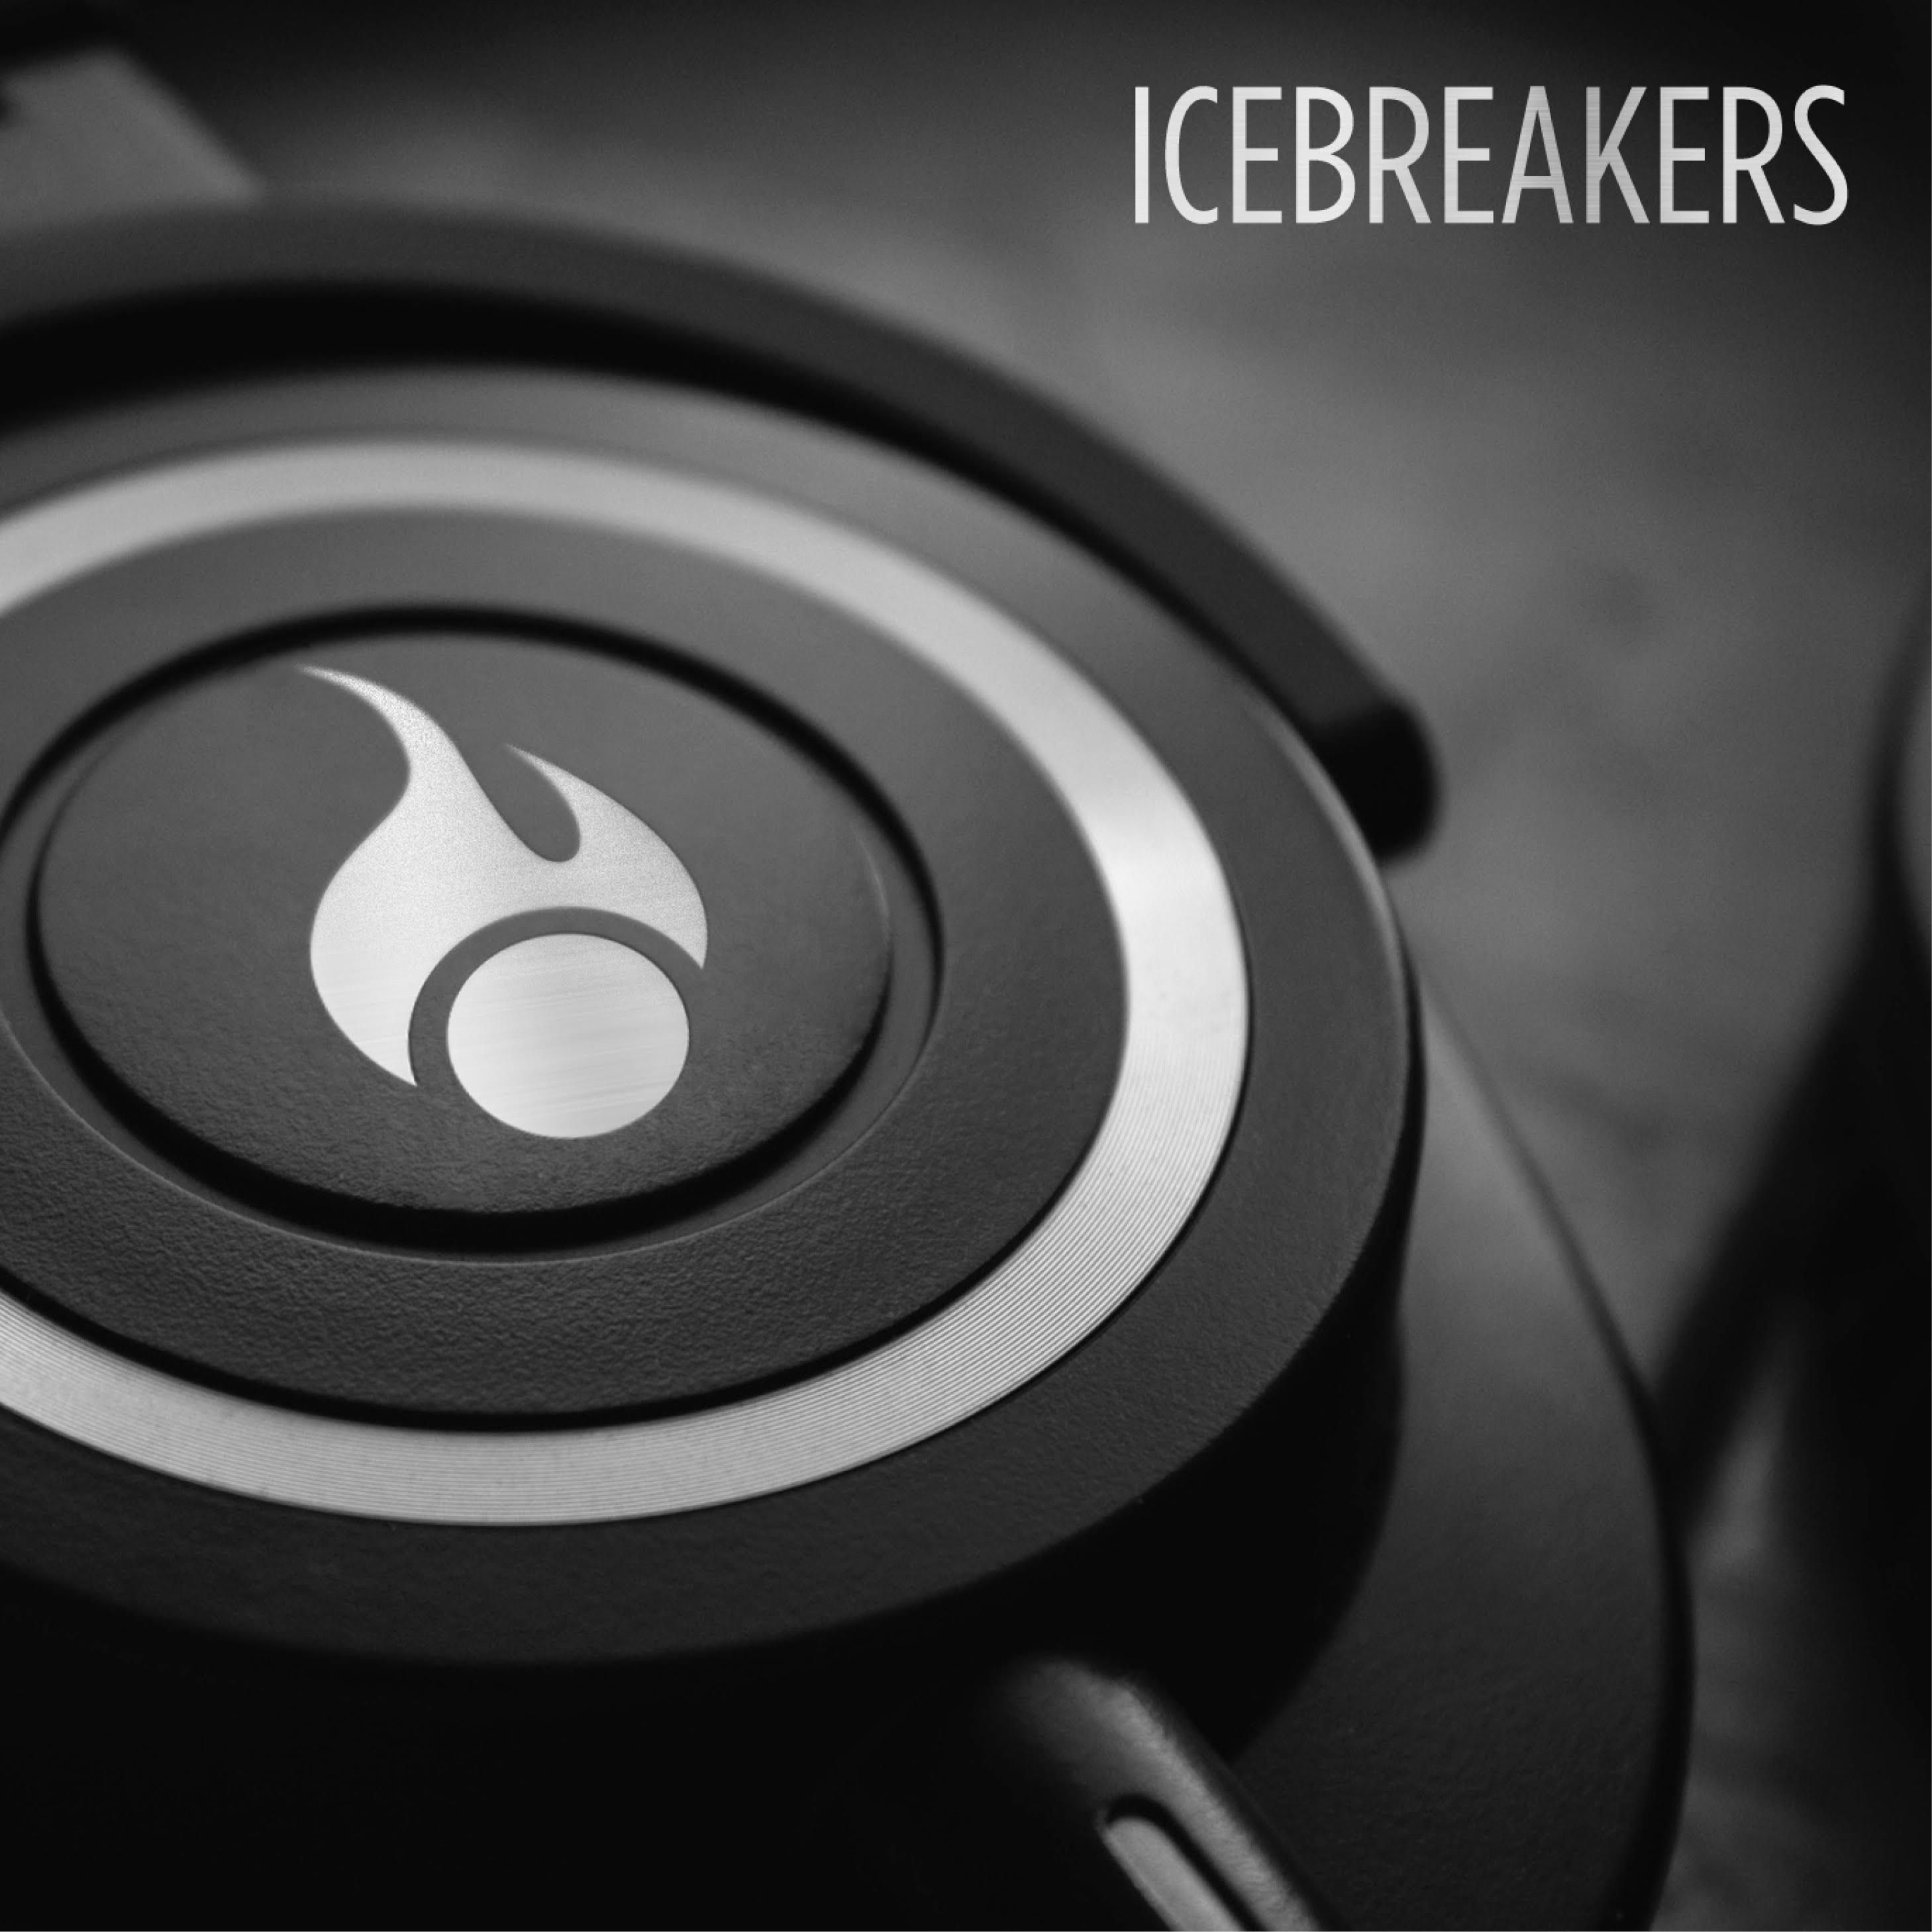 ICEBREAKERS-the official podcast of the ICE awards